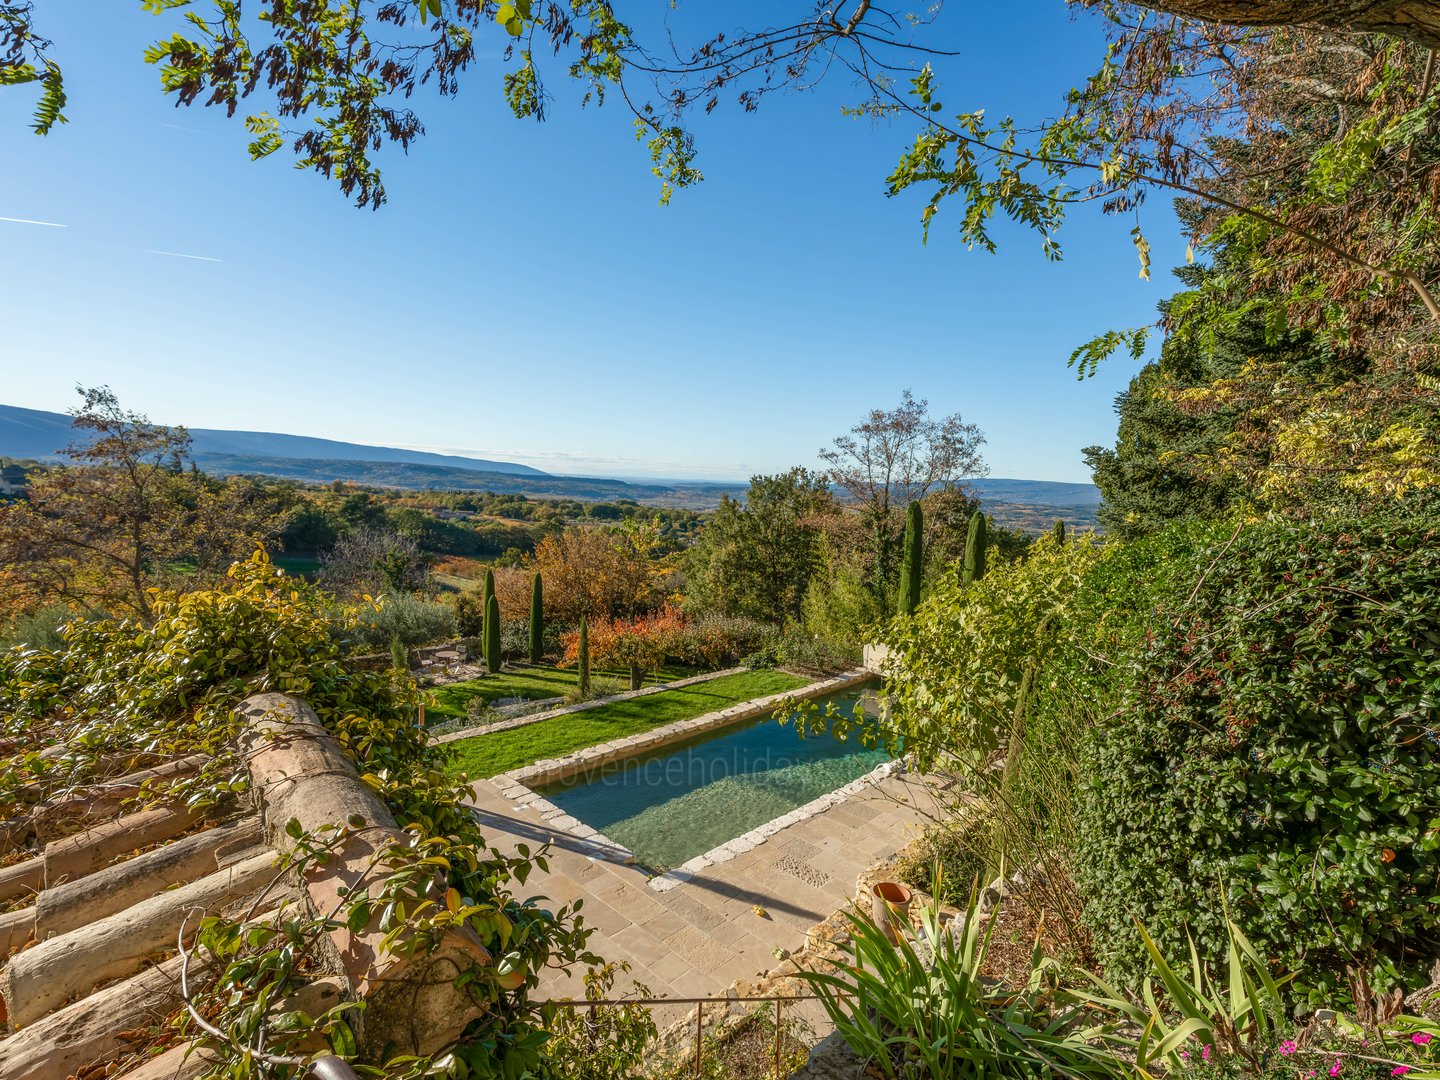 18th century Bastide with views of Luberon for sale - Bonnieux - 13